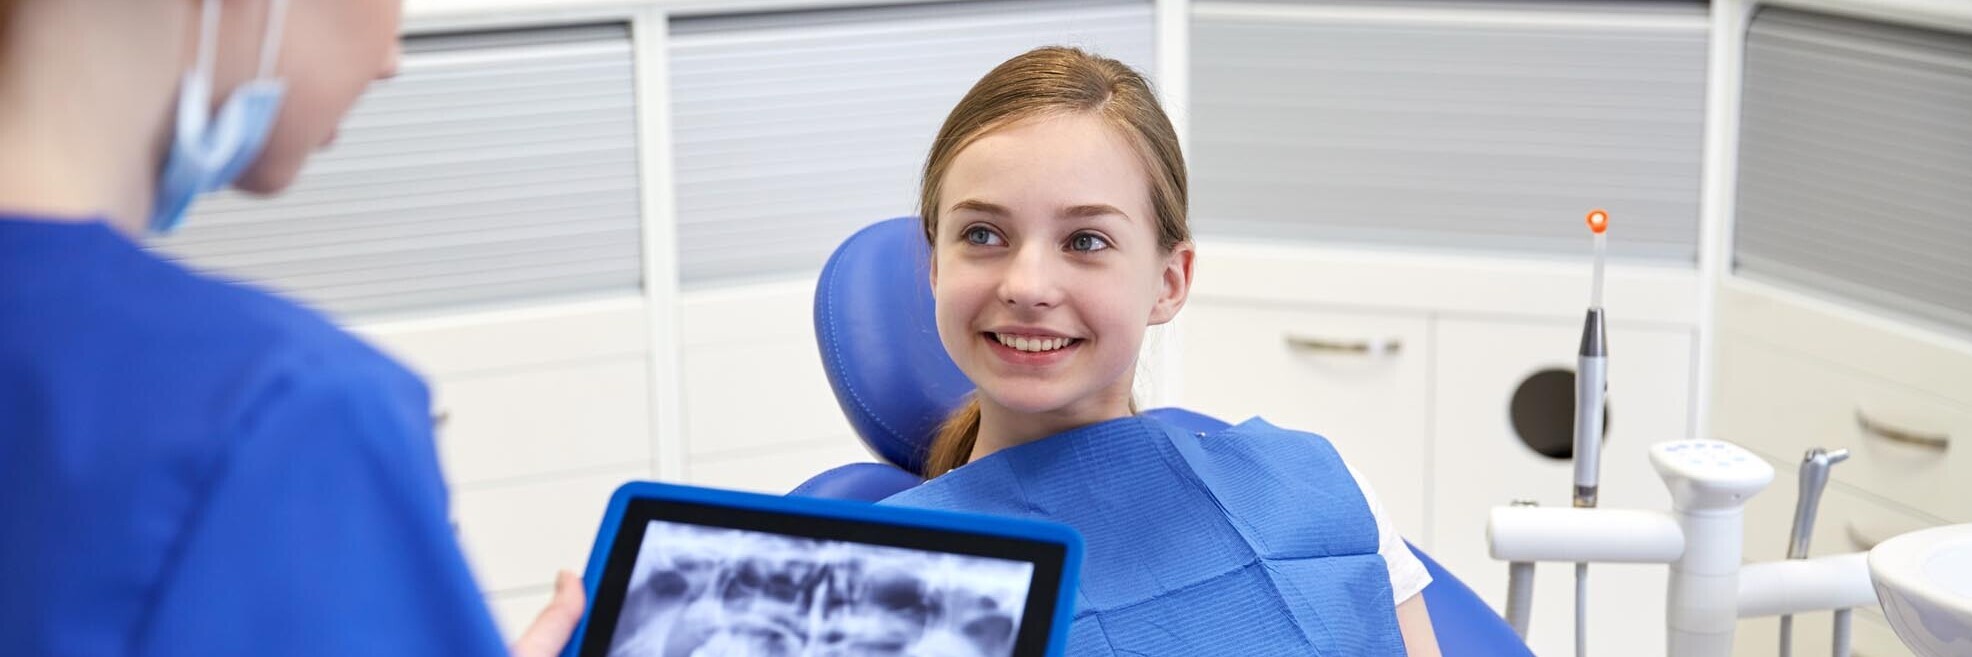 Computer, Digital Tablet, Teenage Girls, Women, Females, Medical Scanner, Medical Scan, Dental Health, Clinic, Medical Exam, Dentist's Office, Young Adult, Teenager, Child, Smiling, X-ray, Expertise, Concepts, Healthcare And Medicine, Technology, X-ray Image, Indoors, Cheerful, Human Teeth, Doctor, Dentist, Paramedic, Professional Occupation, Occupation, Patient, People, Dental Equipment, PC, roentgen, rontgen, stomatologist, stomatology, Stomatological, Application Software, Portable Information Device